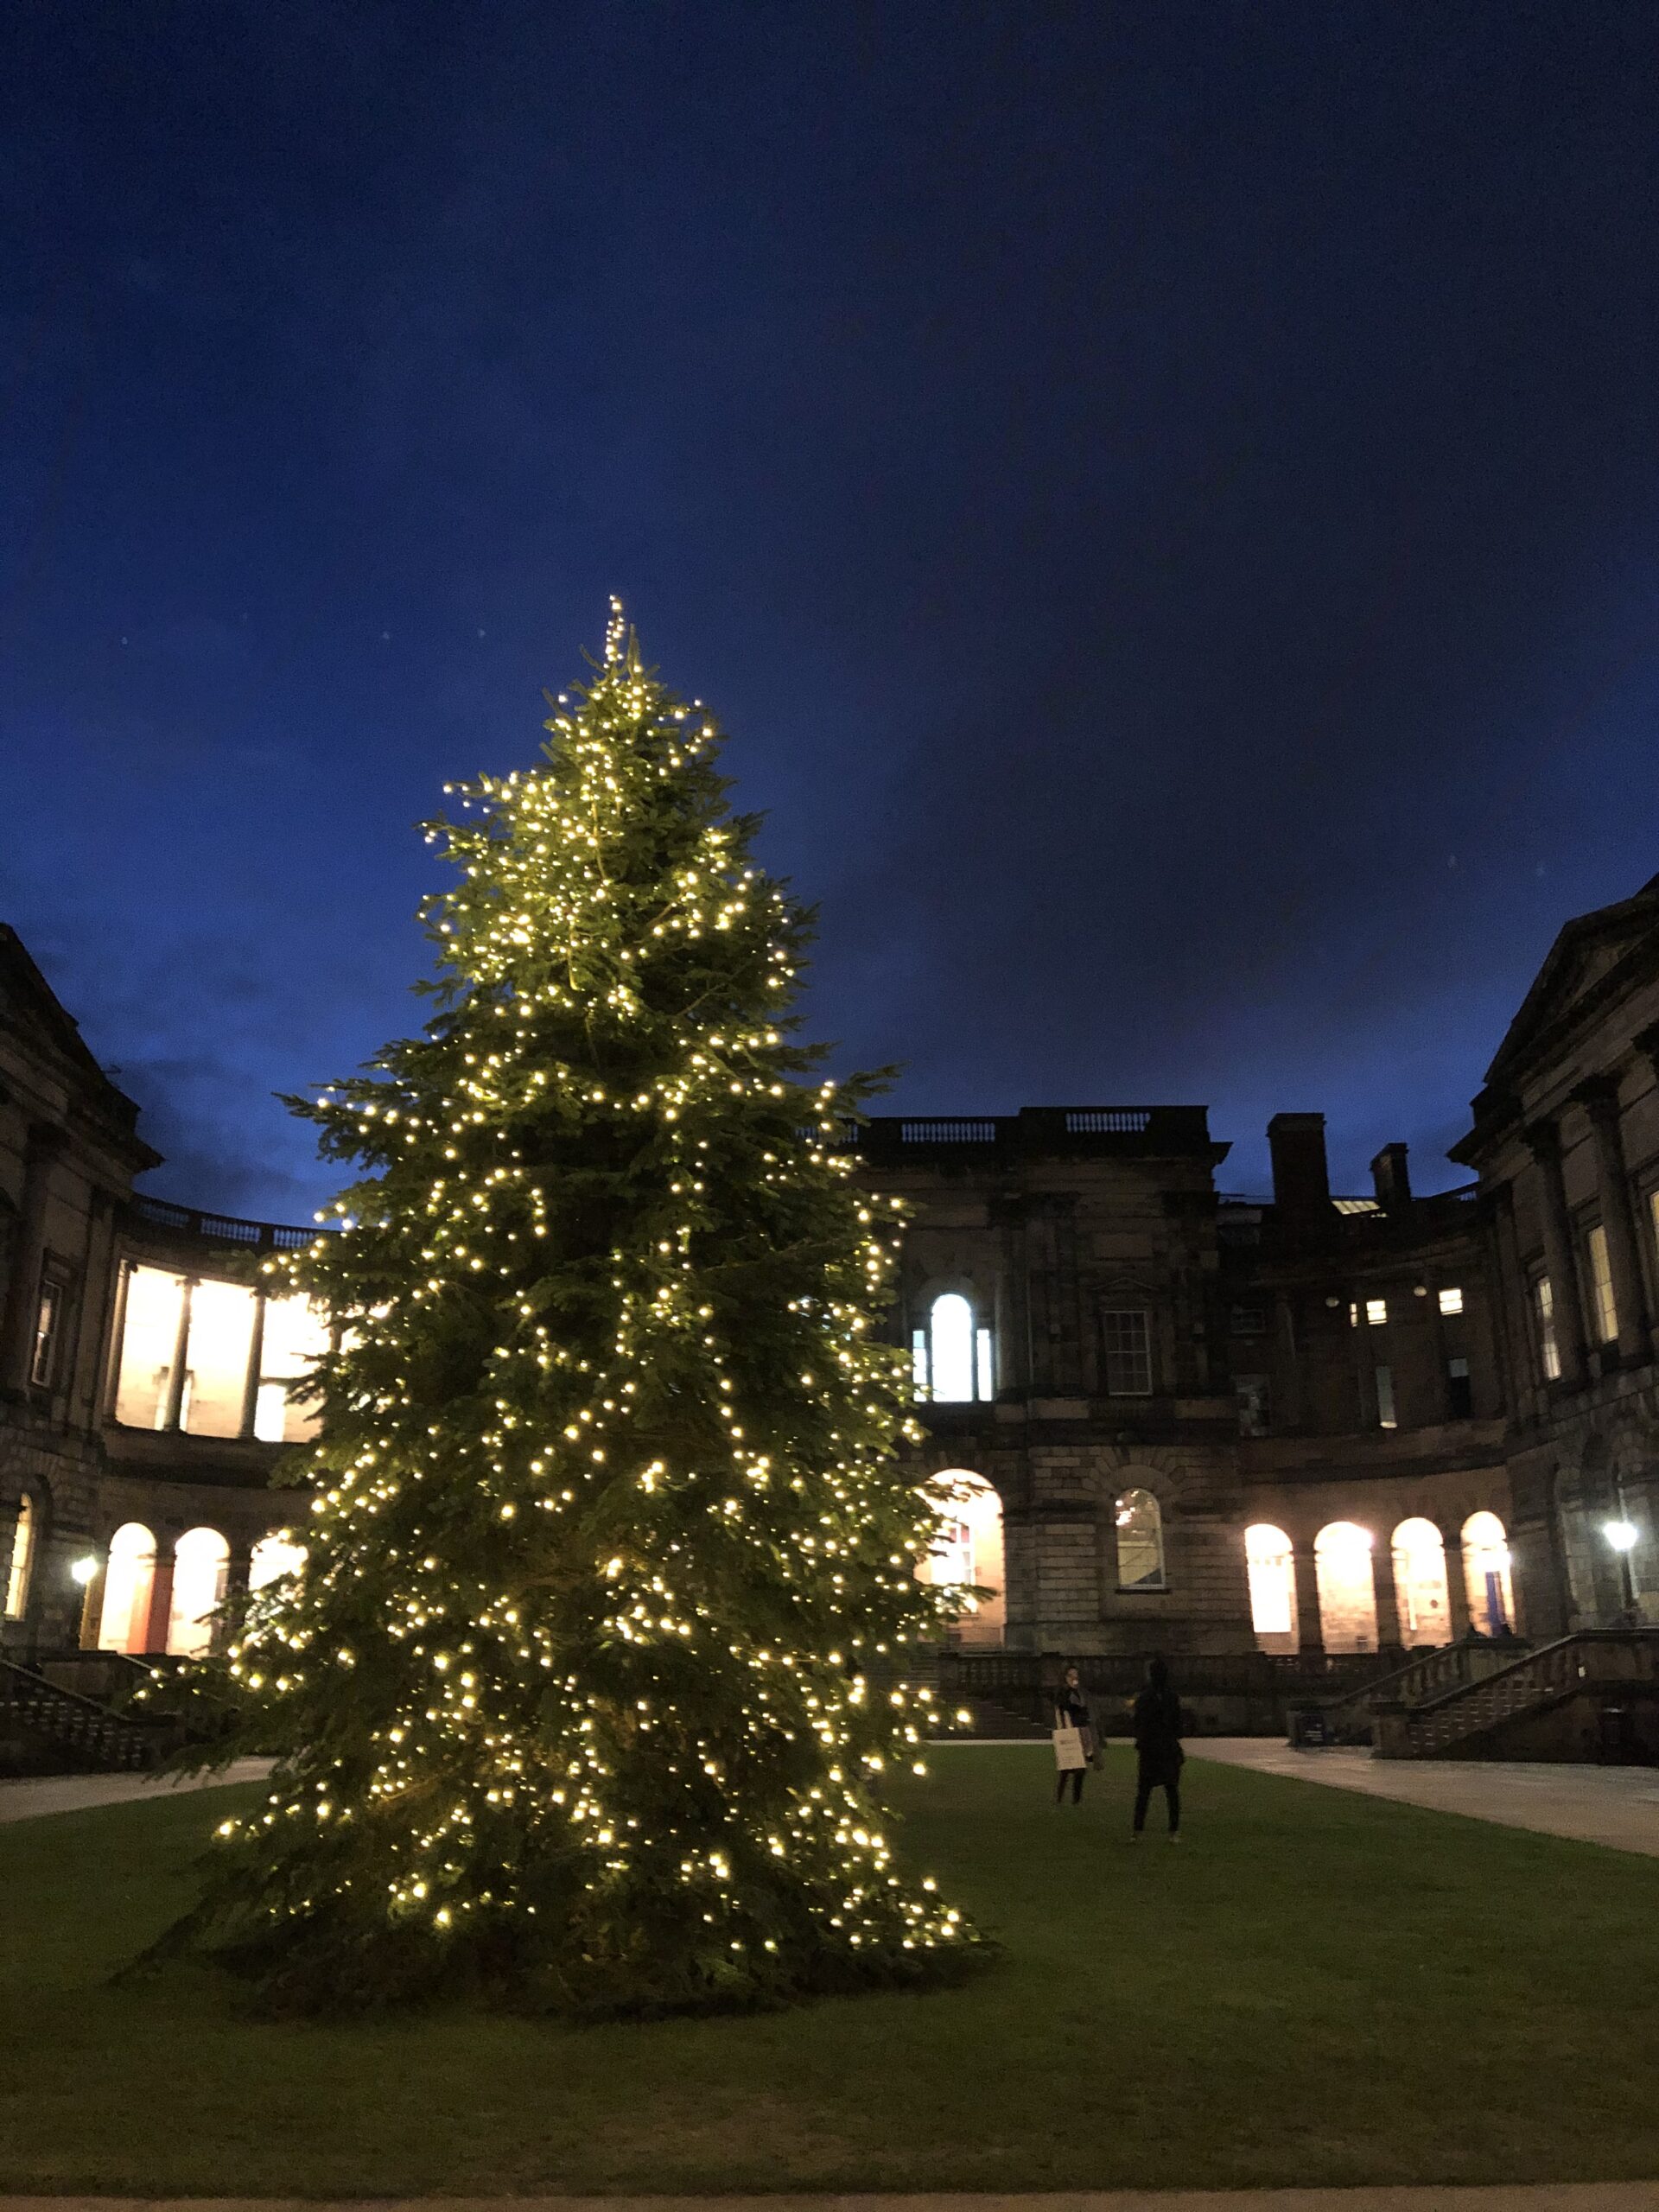 The Christmas tree in Old College Quad